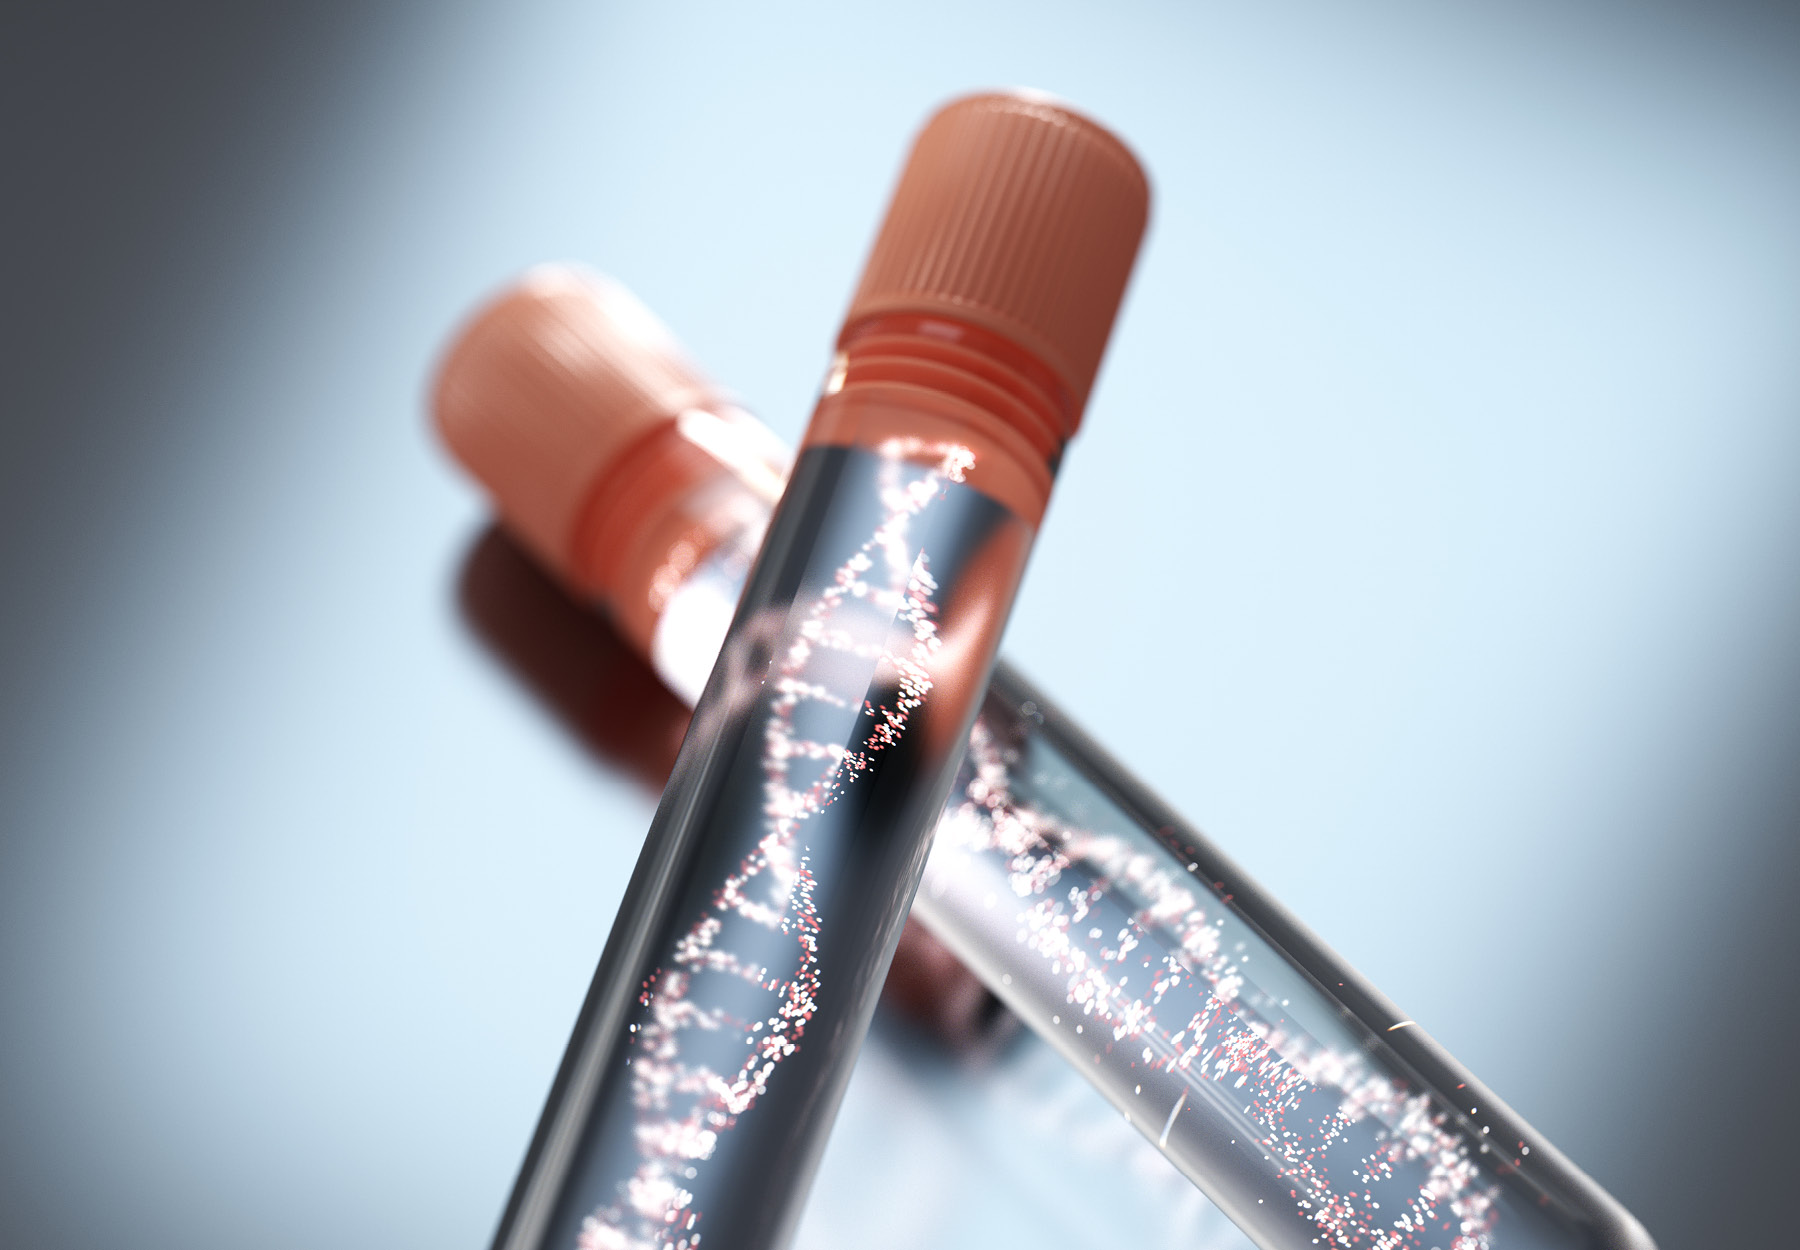 Stock image of crossed test tubes with DNA strand image inside to show concept of genetic testing